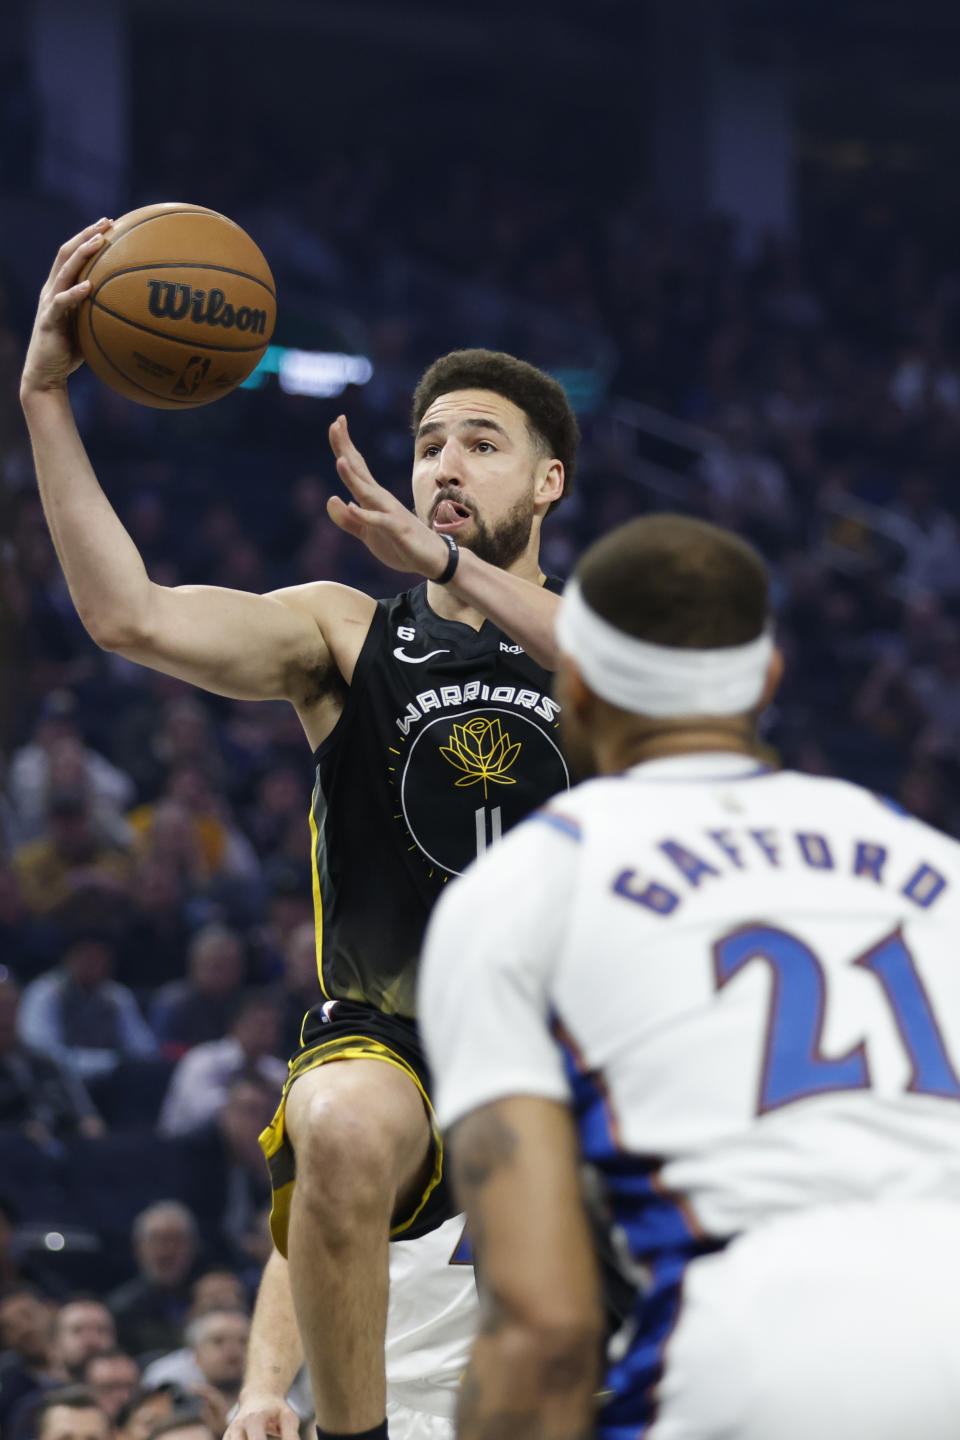 Golden State Warriors guard Klay Thompson (11) shoots over Washington Wizards center Daniel Gafford (21) during the first half of an NBA basketball game in San Francisco, Monday, Feb. 13, 2023. (AP Photo/Jed Jacobsohn)